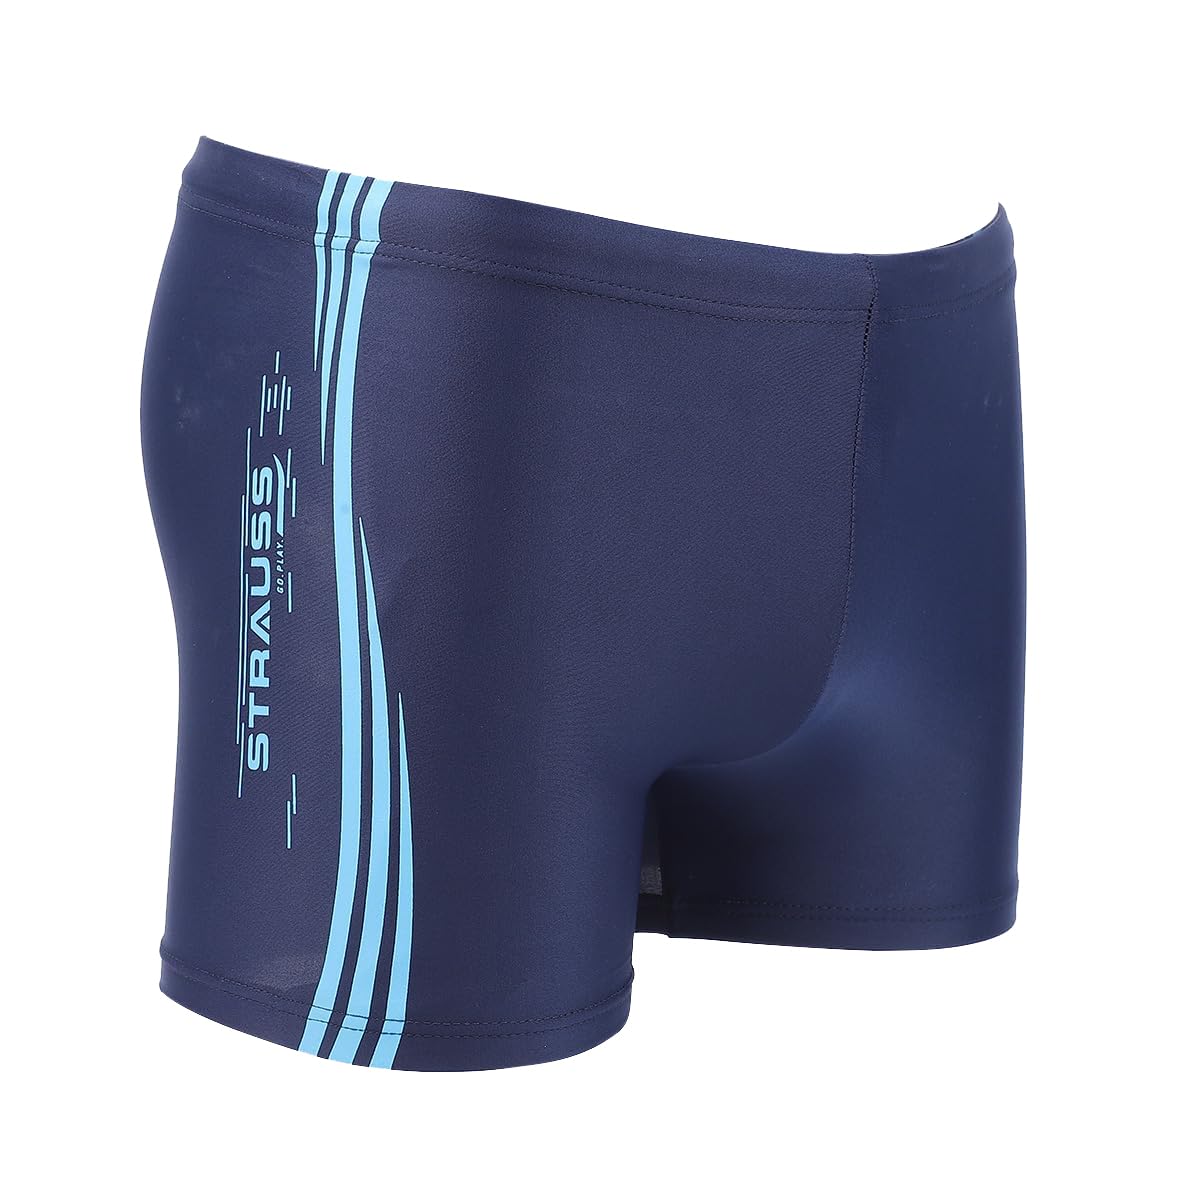 STRAUSS Swimming Shorts | Swimming Trunks for Men & Boys | Easily Adjustable, Breathable & Quick Drying Shorts | Size: S,(Blue Lines)